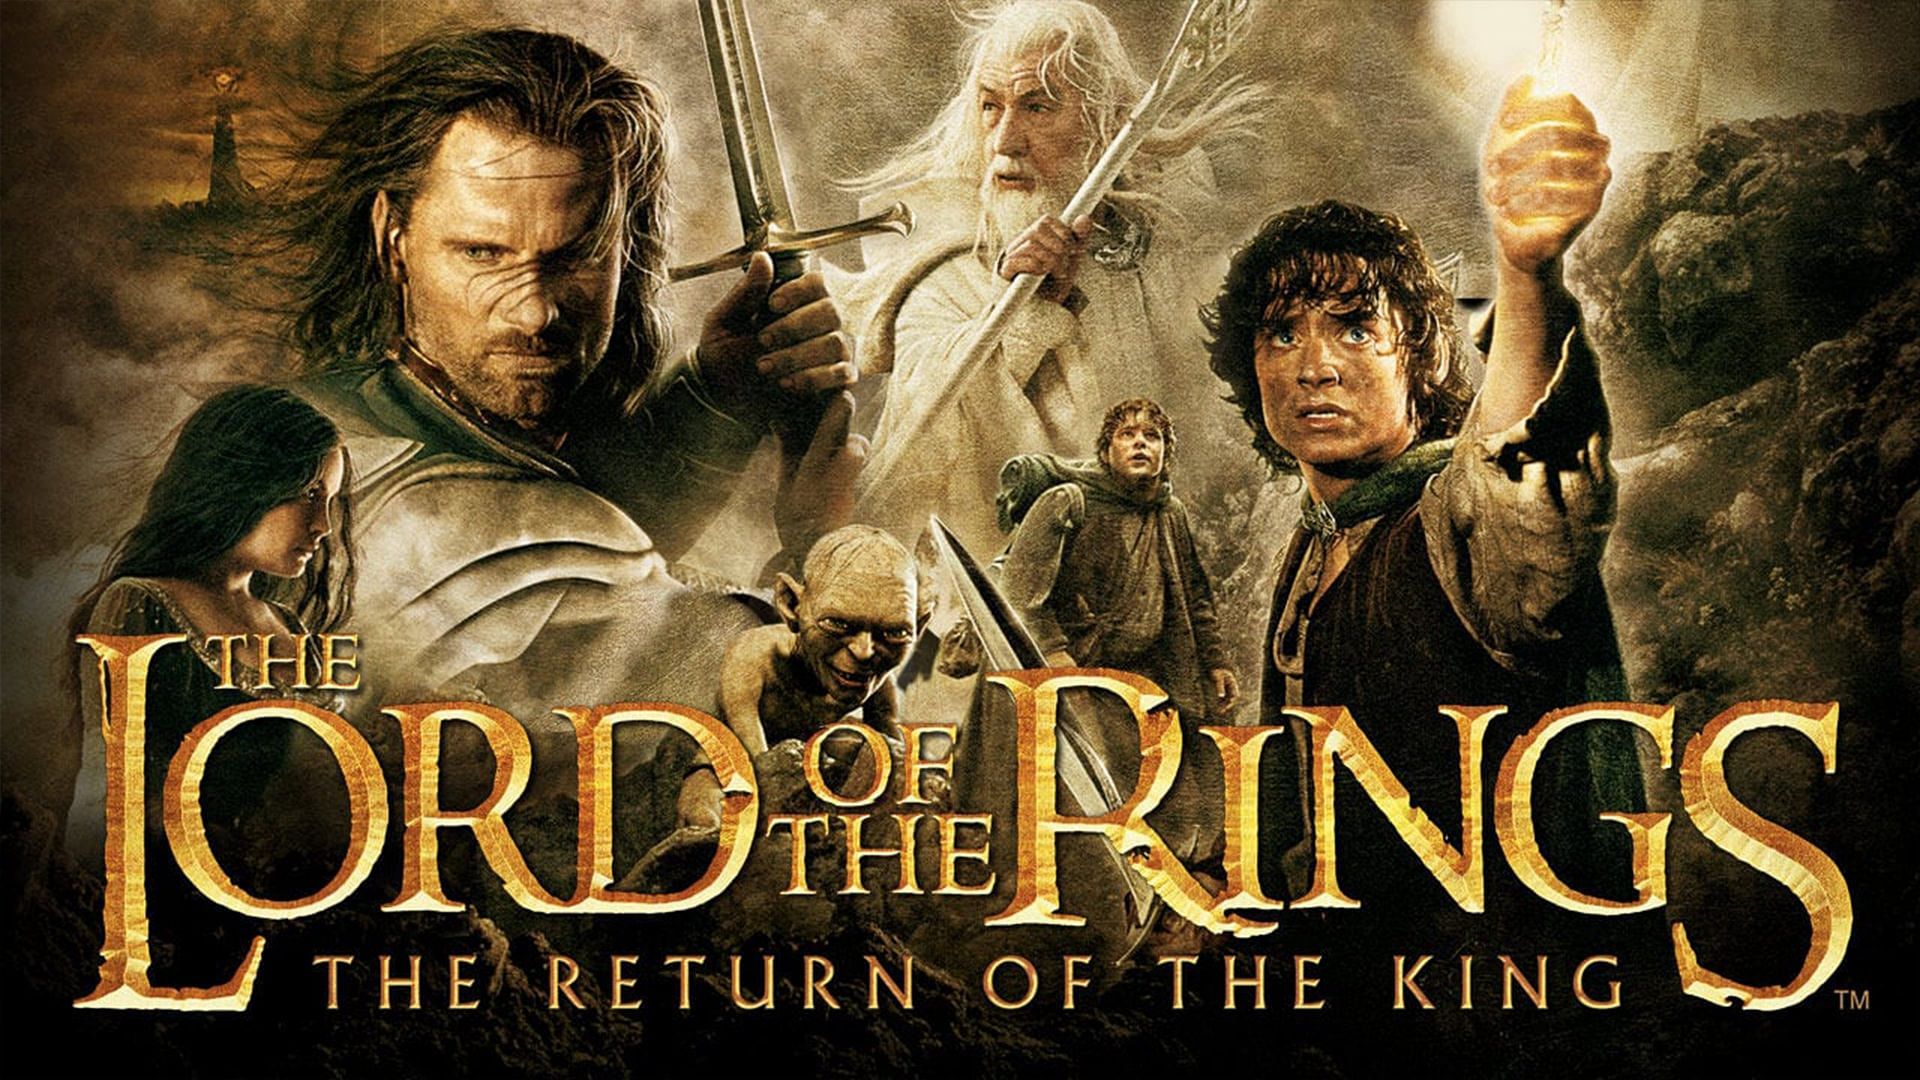 The Lord of the Rings: The Return of the King (Image via New Line Cinema)